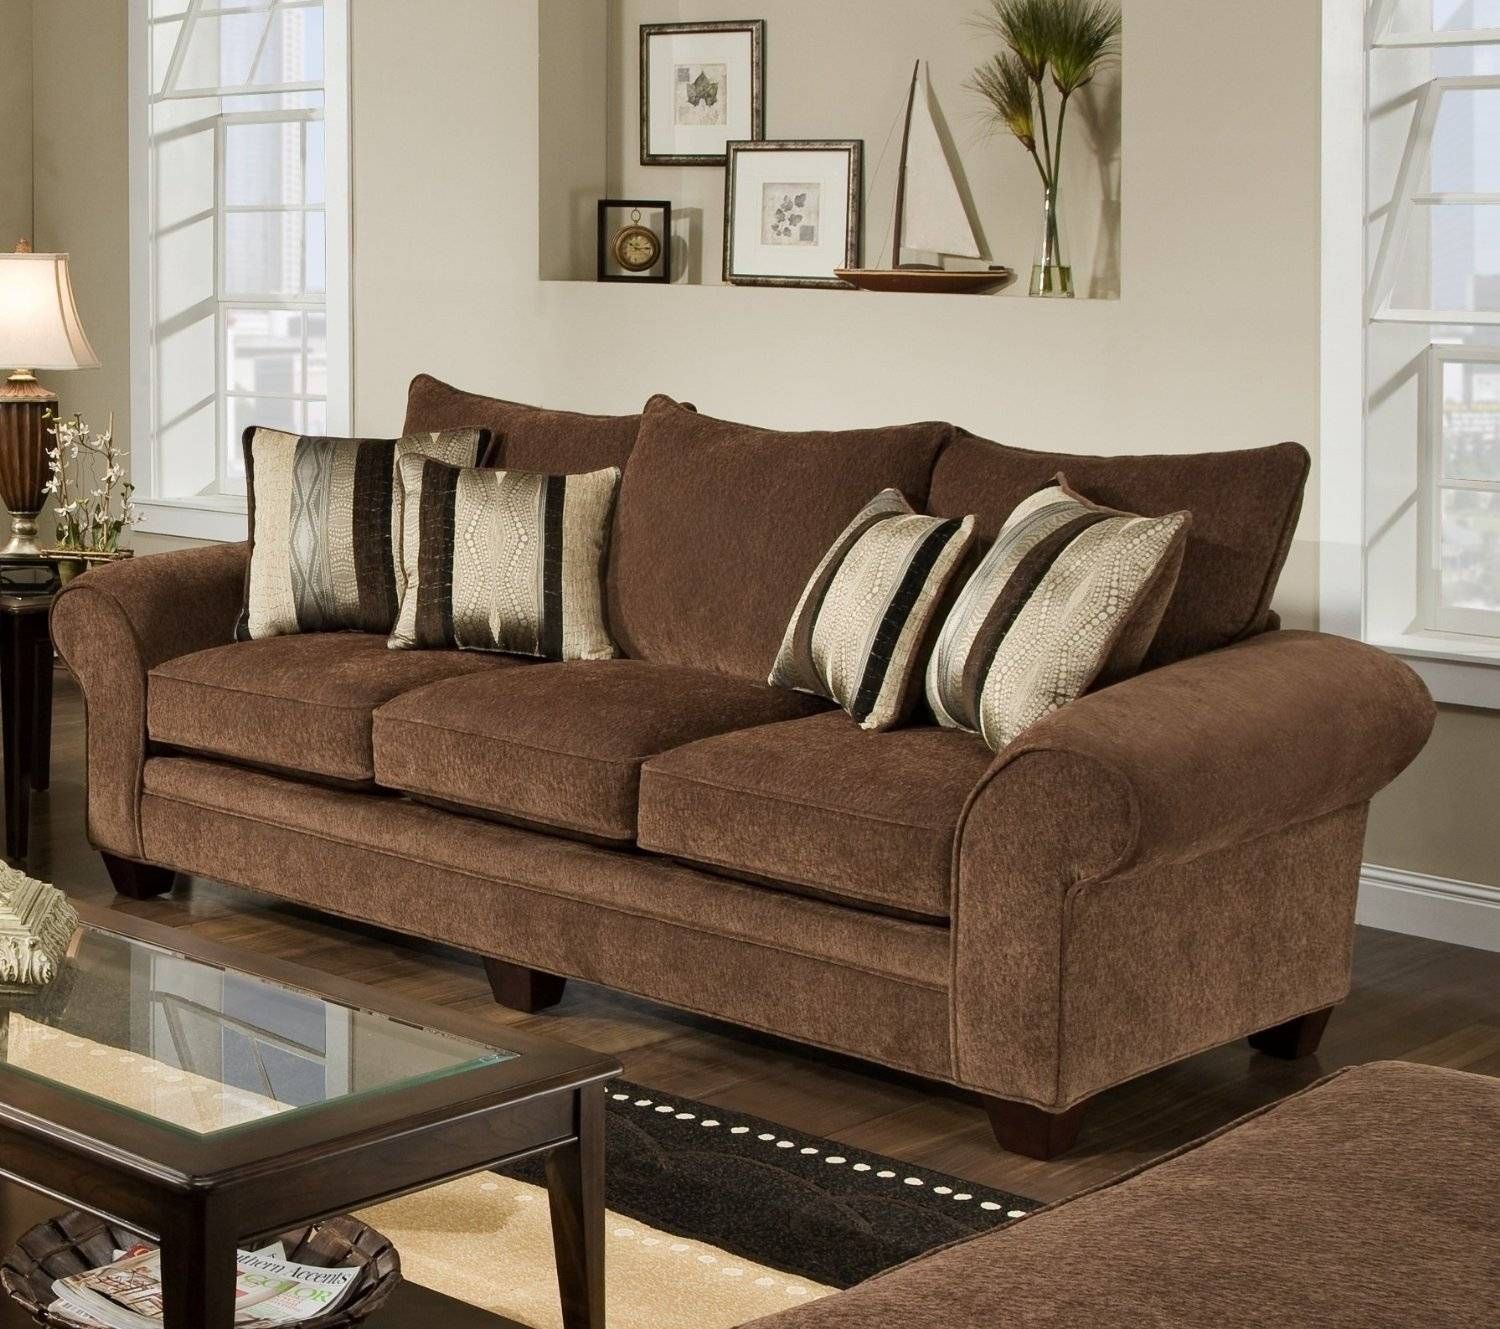 Furniture: Brown Benchcraft Furniture Sofa Decor With Glass And Throughout Berkline Sofa (View 26 of 30)